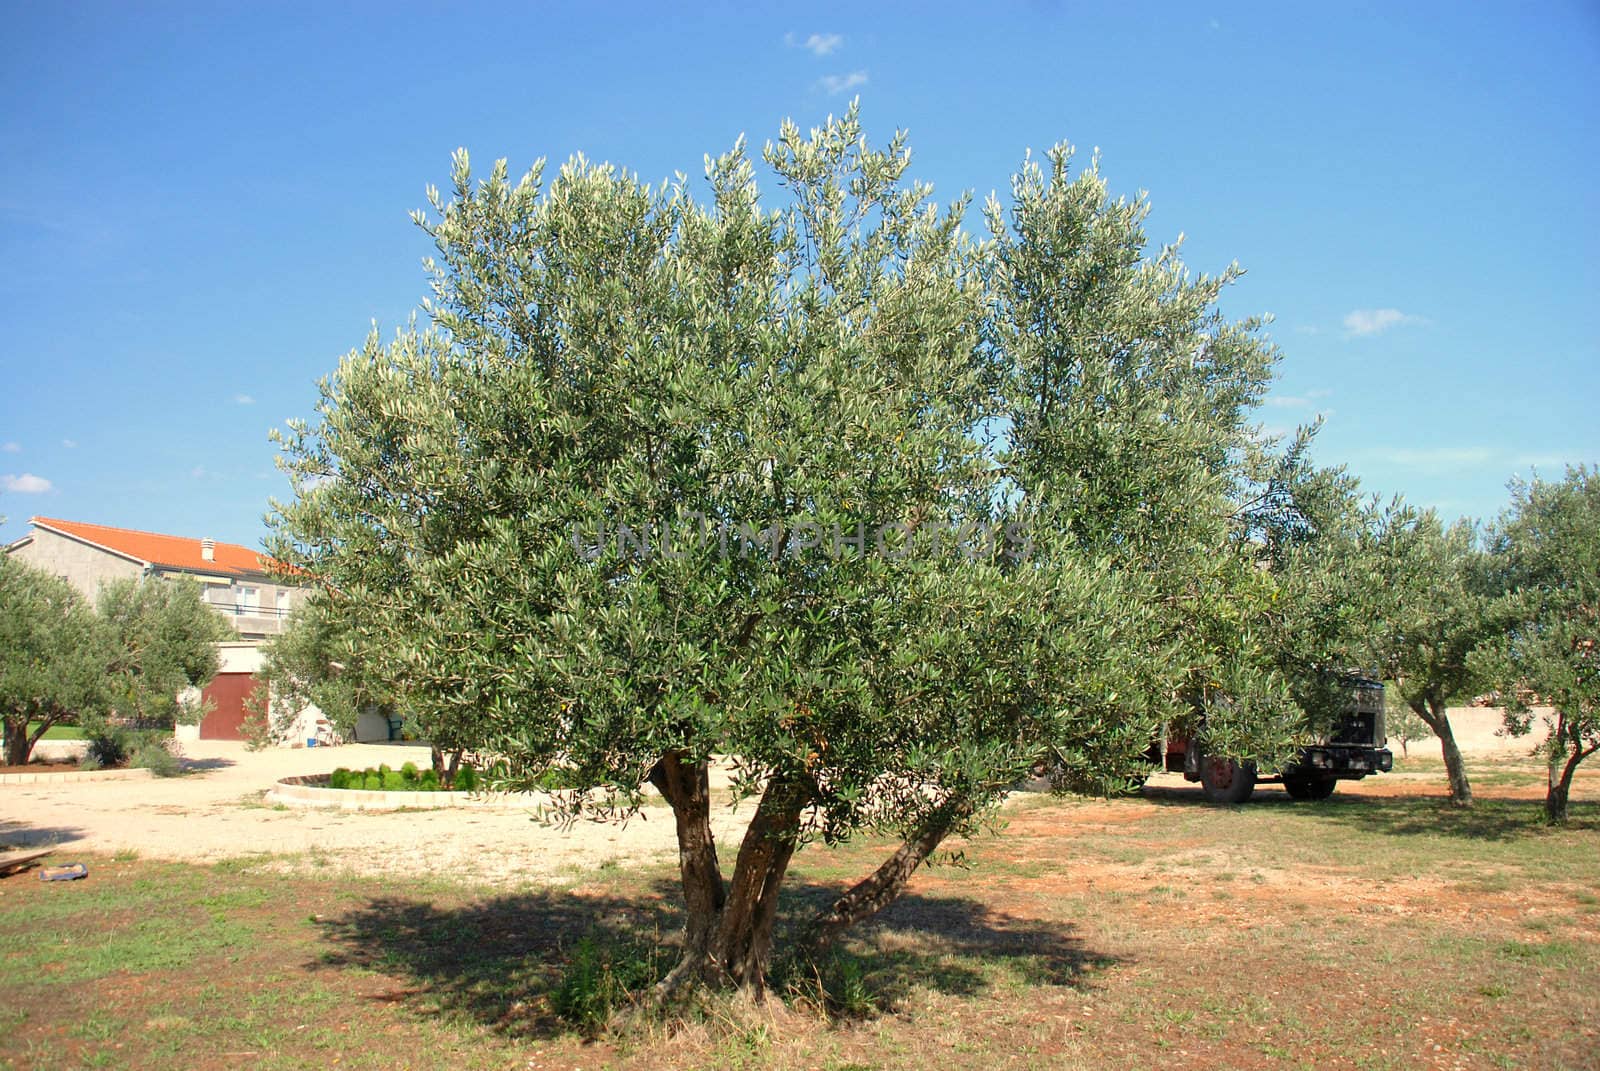 The olive tree groves.